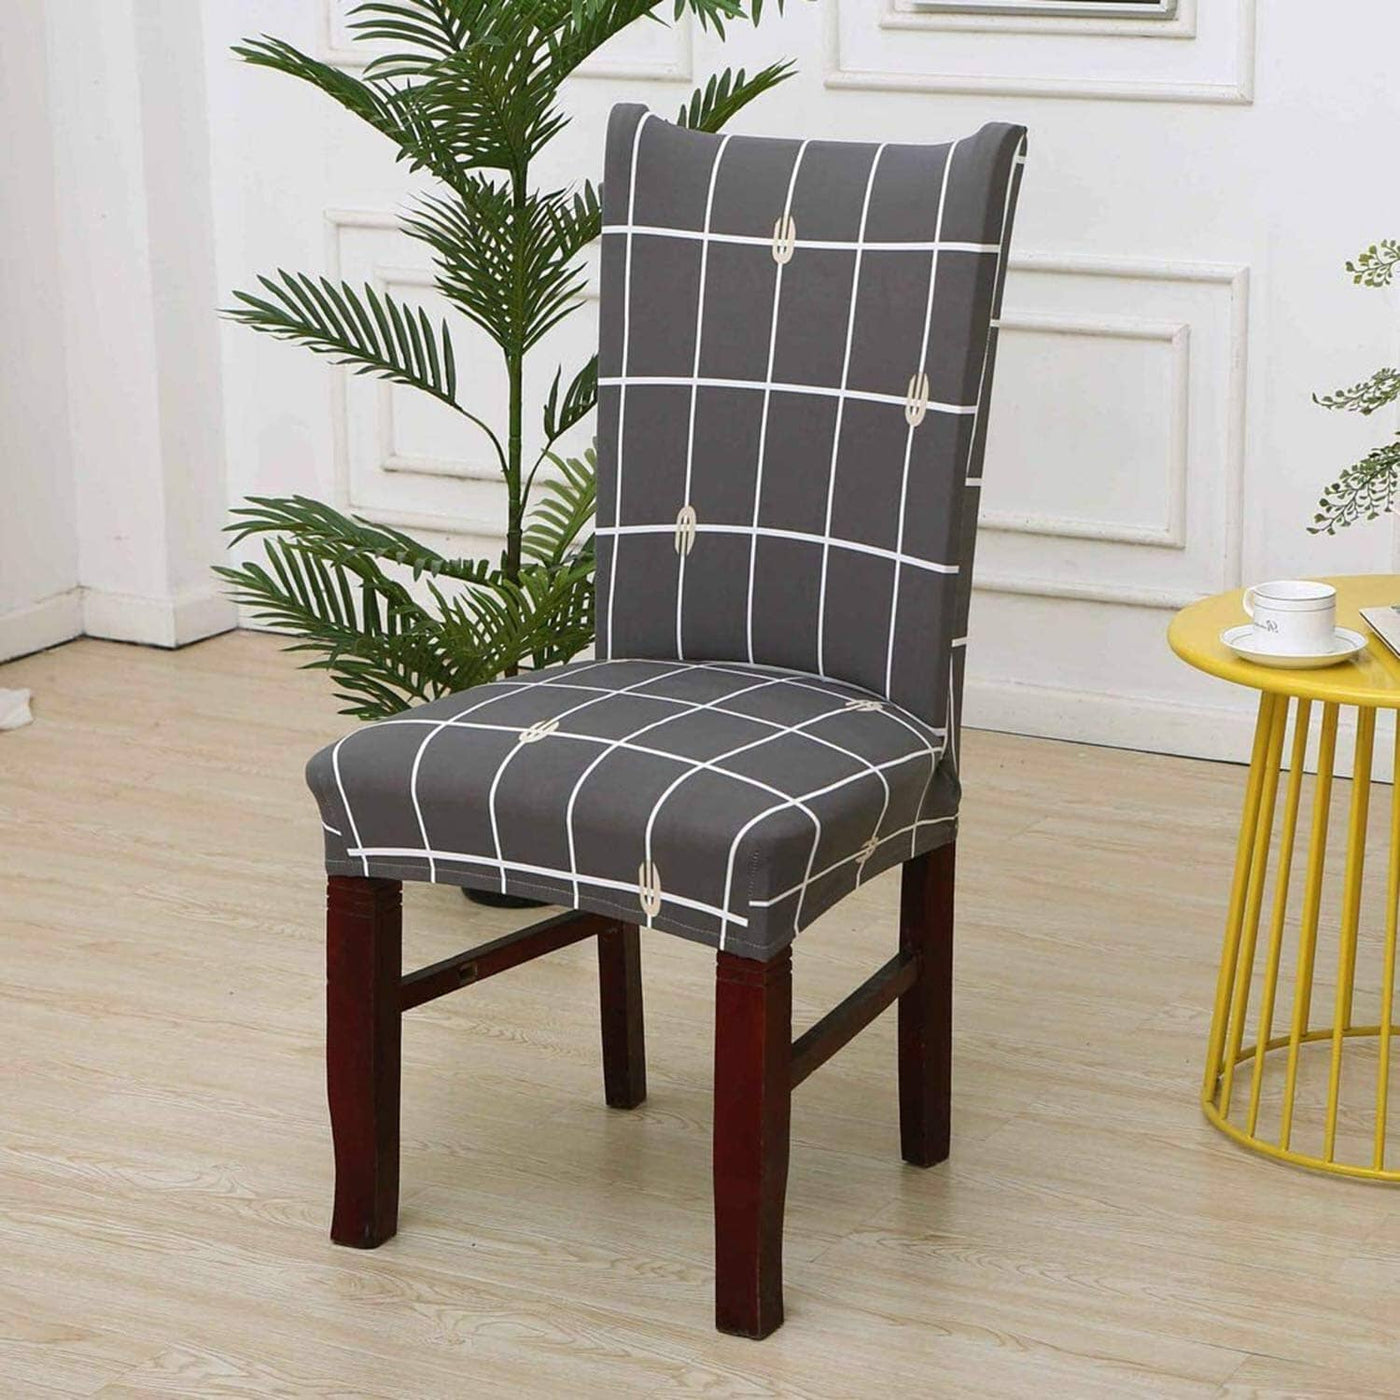 Grey Check Premium Chair Cover - Stretchable & Elastic Fitted Great Happy IN 2 PCS - ₹799 